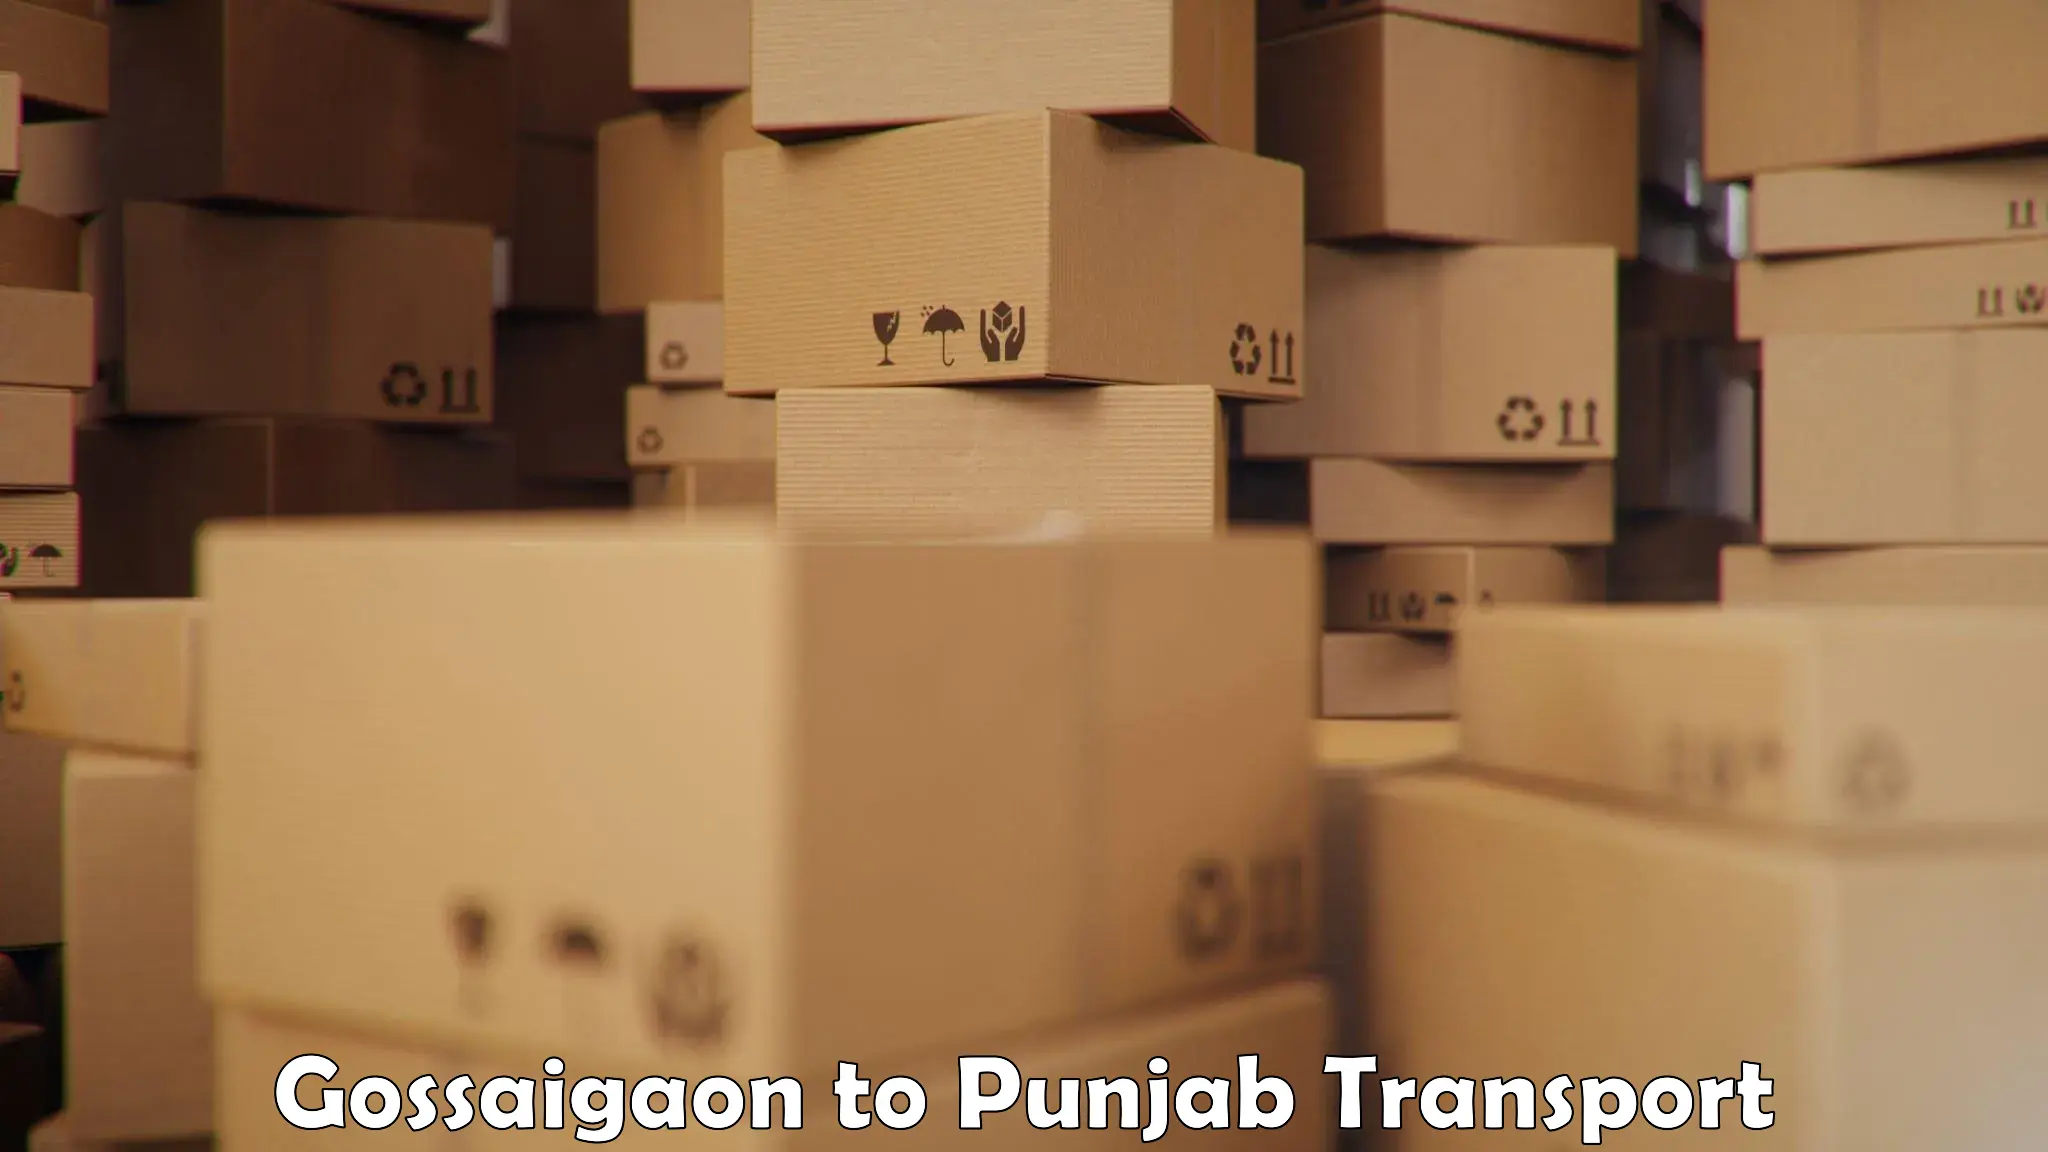 Container transport service Gossaigaon to Punjab